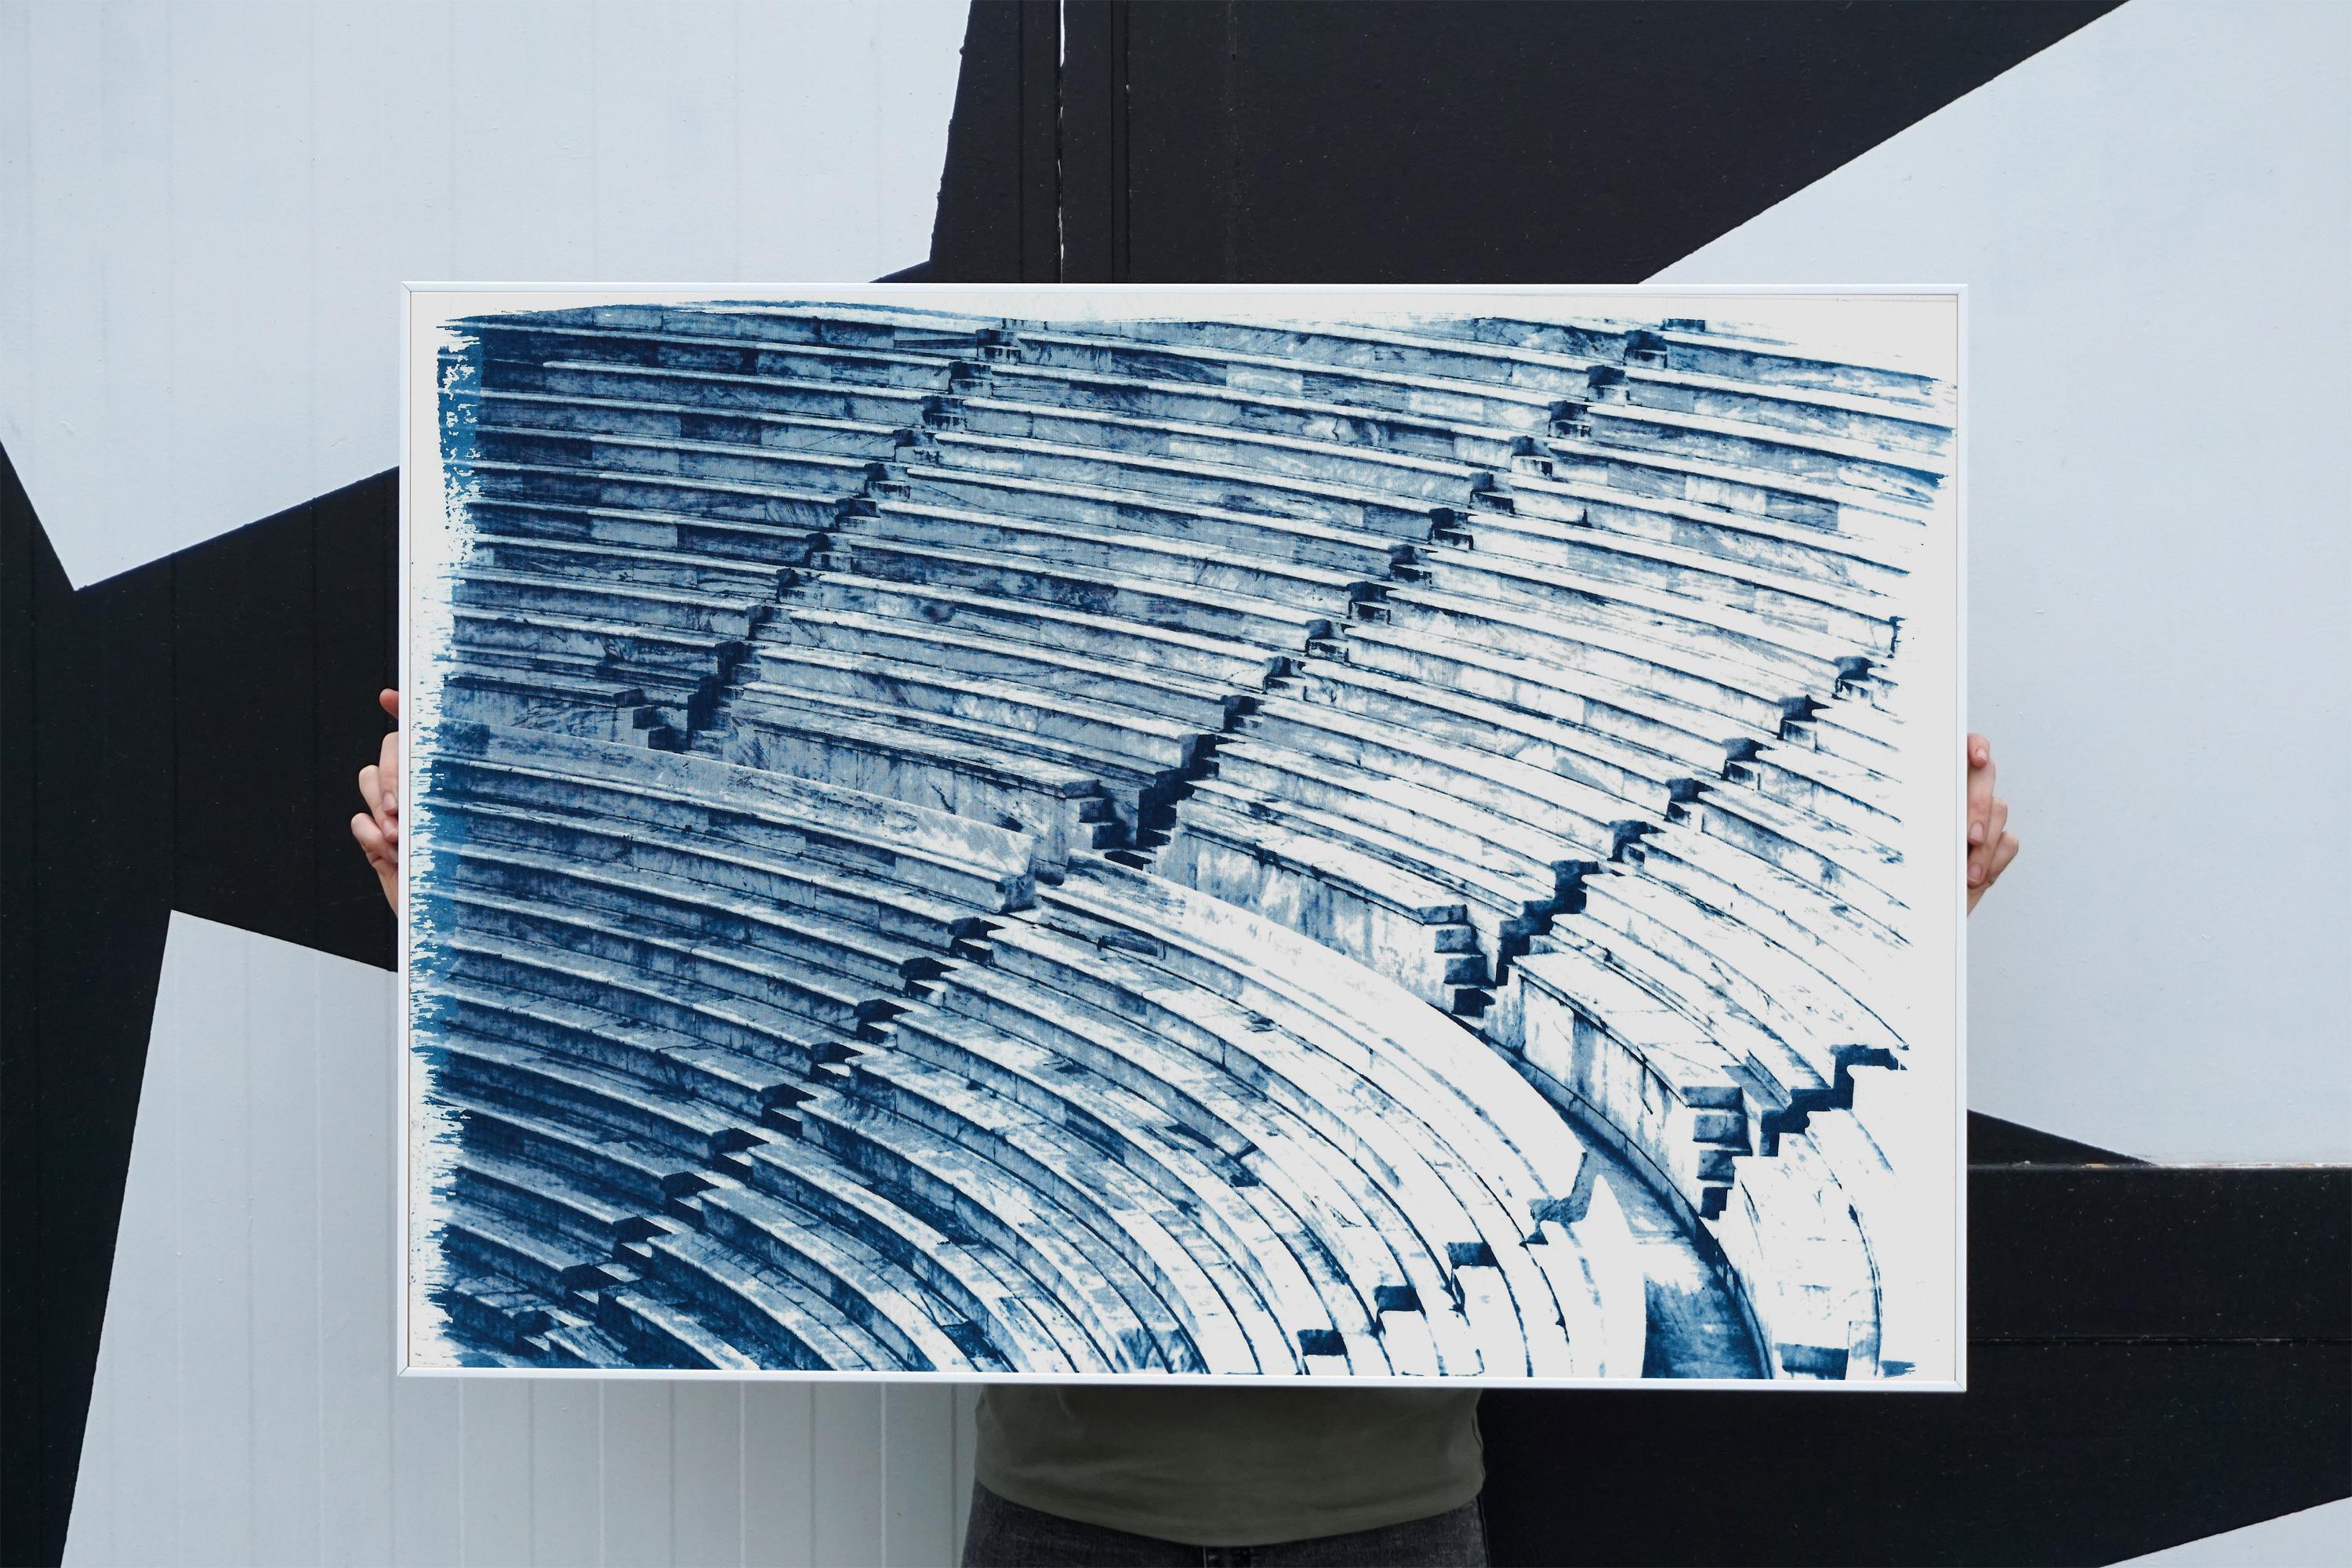 This is an exclusive handprinted limited edition cyanotype.

Details:
+ Title: Greek Marble Amphitheater 
+ Year: 2019
+ Edition Size: 50
+ Stamped and Certificate of Authenticity provided
+ Measurements : 70x100 cm (28x 40 in.), a standard frame